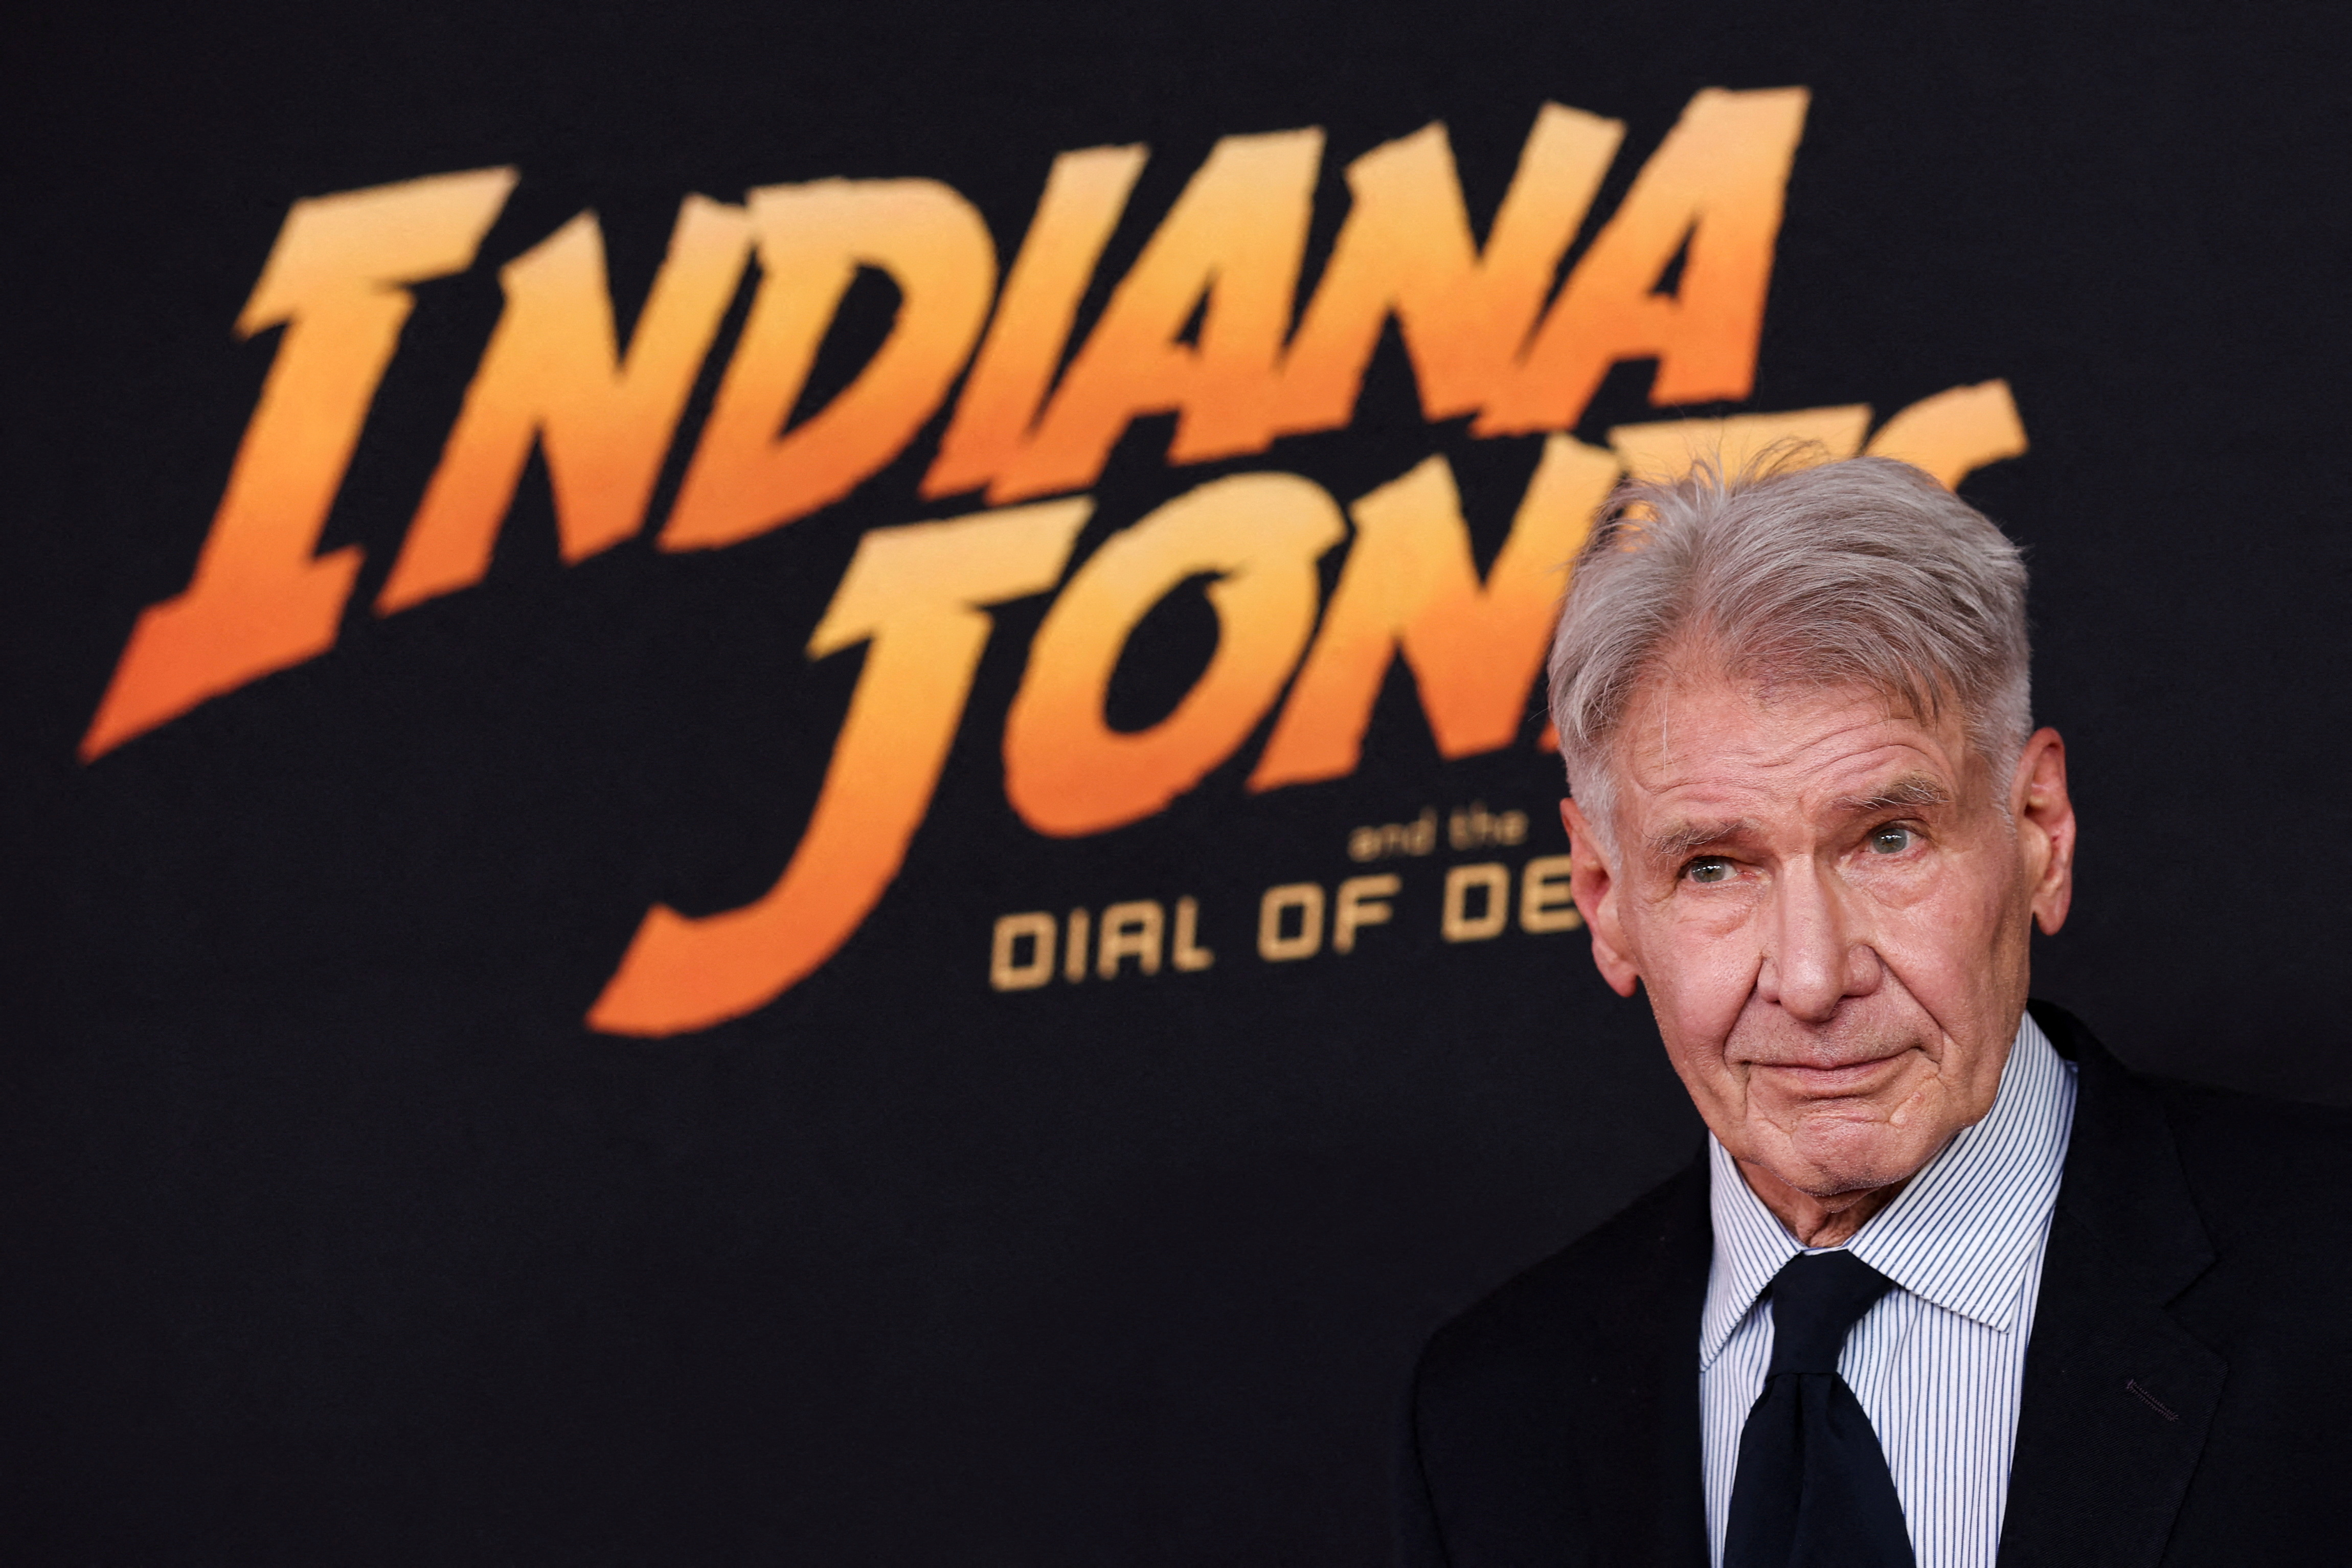 Indiana Jones - Harrison Ford - Character profile and chronology 